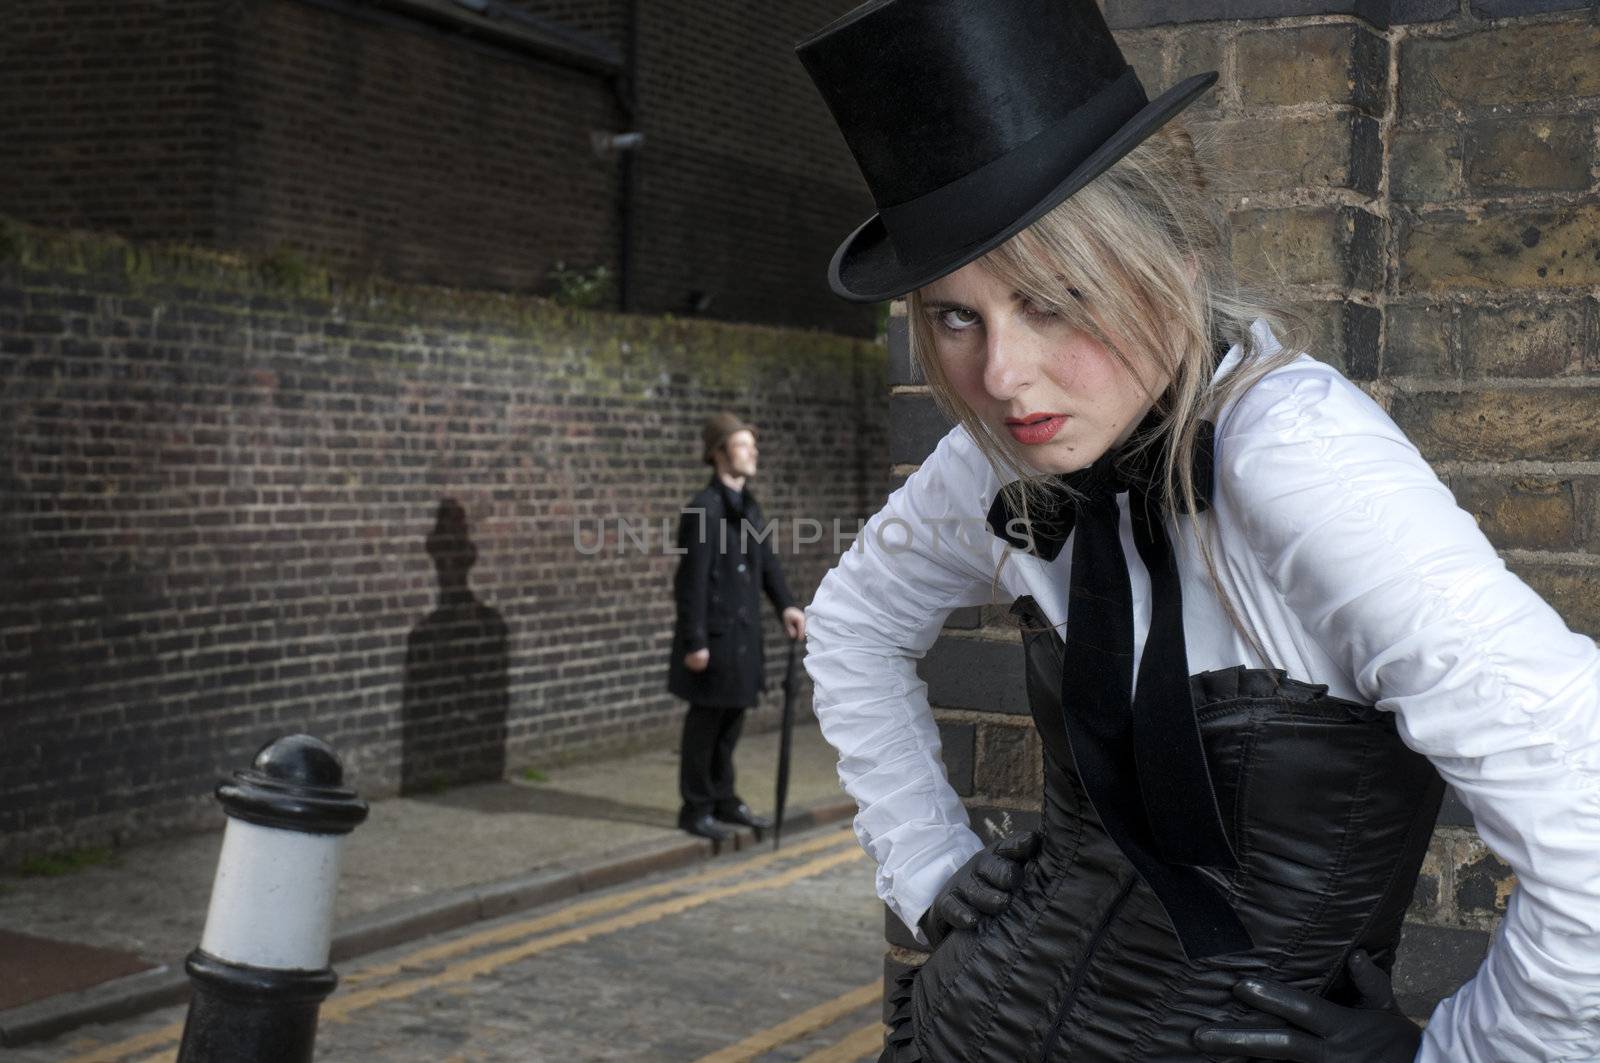 Street Fashion shot of woman in late victorian clothes with man in the background.